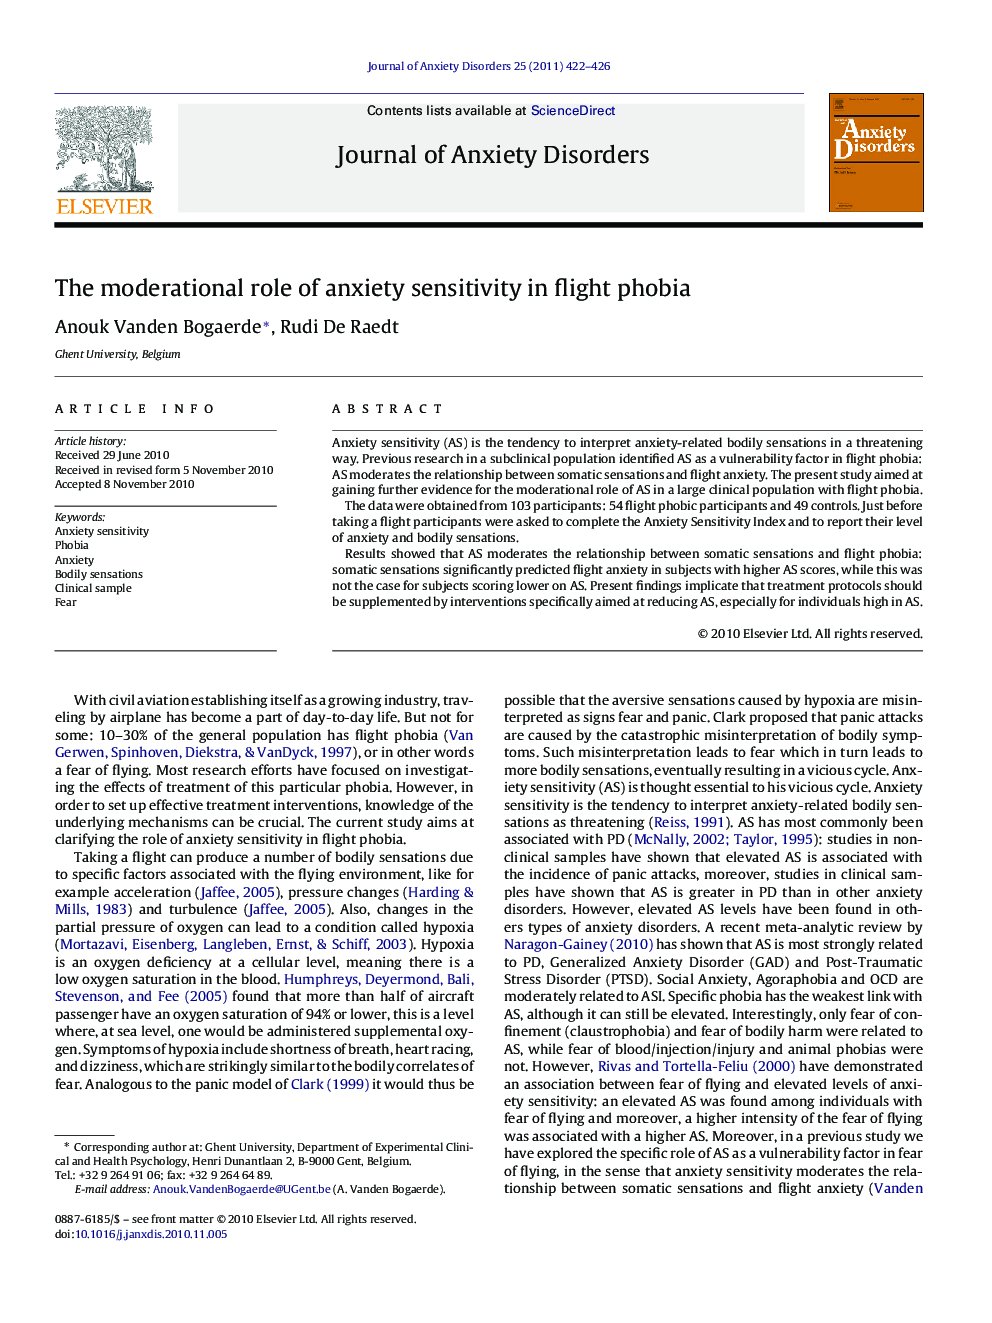 The moderational role of anxiety sensitivity in flight phobia